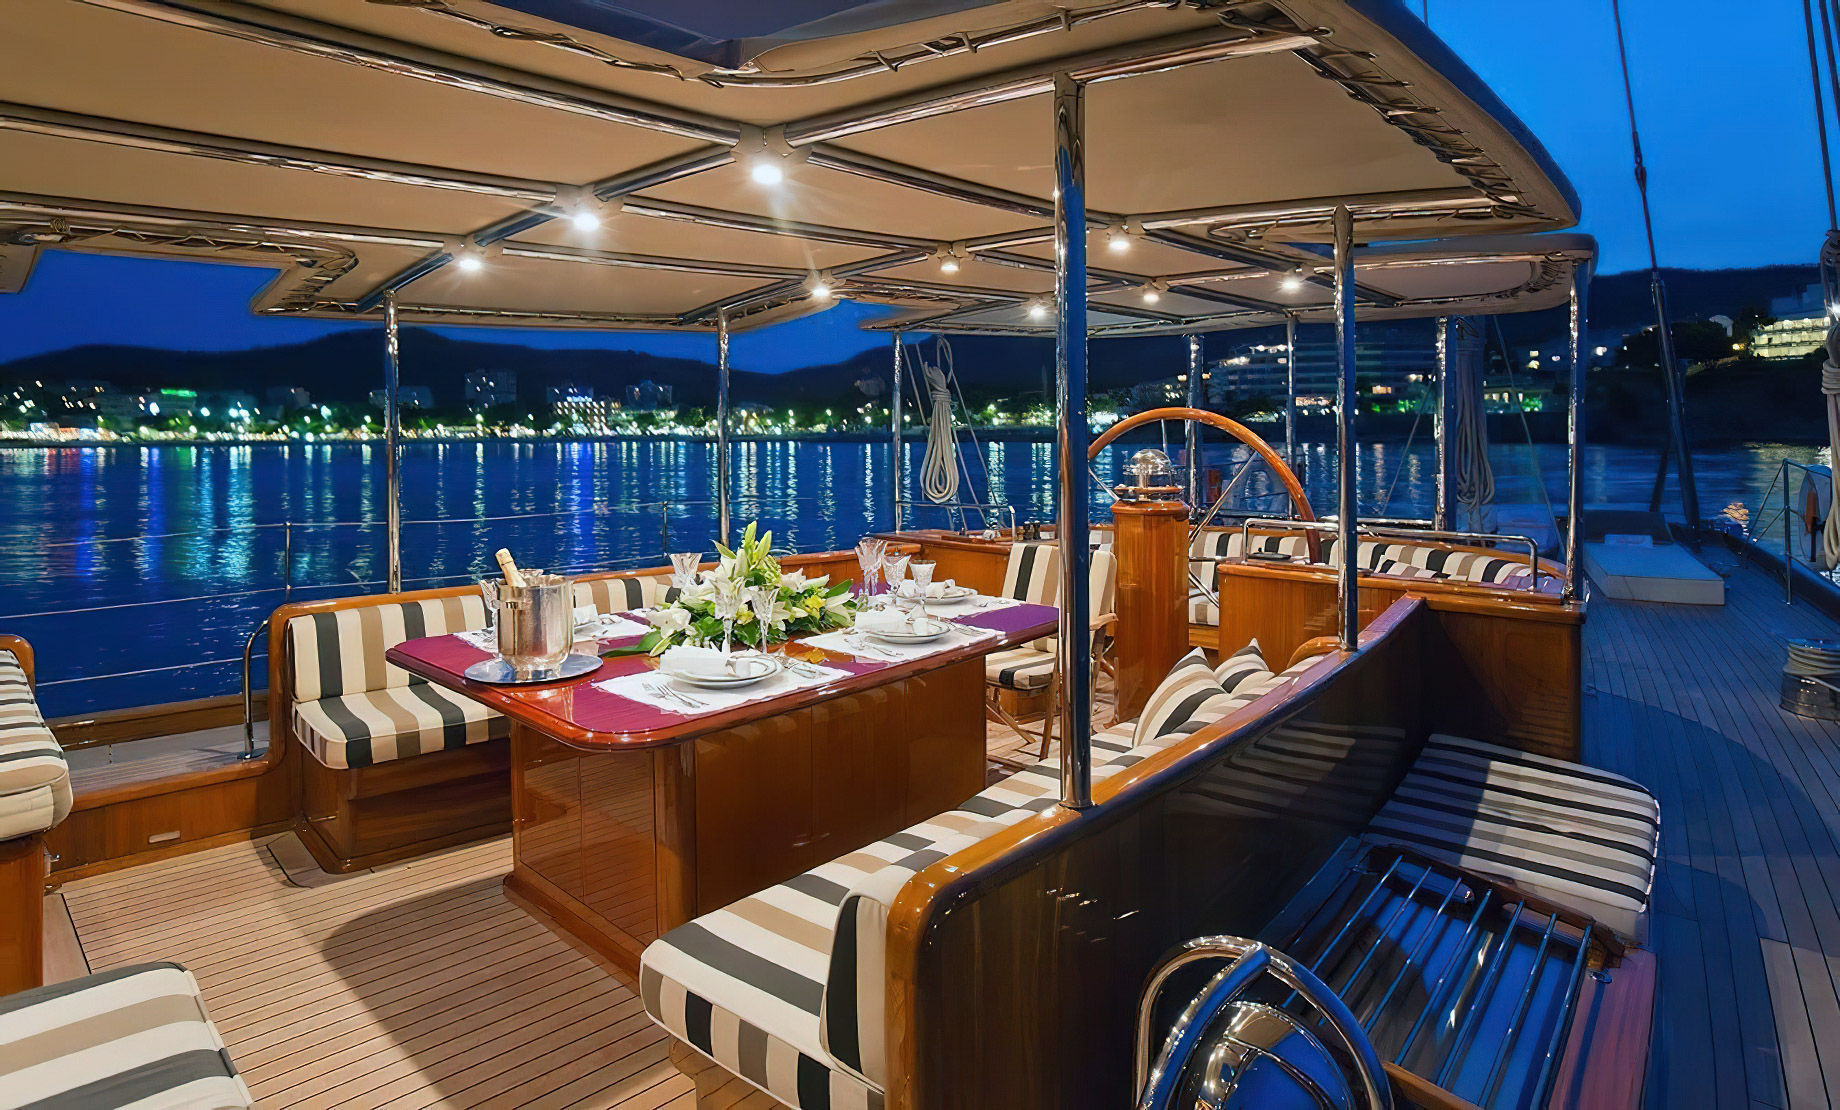 Discover Six of the Best Luxury Yachts for Sale - SY GWEILO - Aft